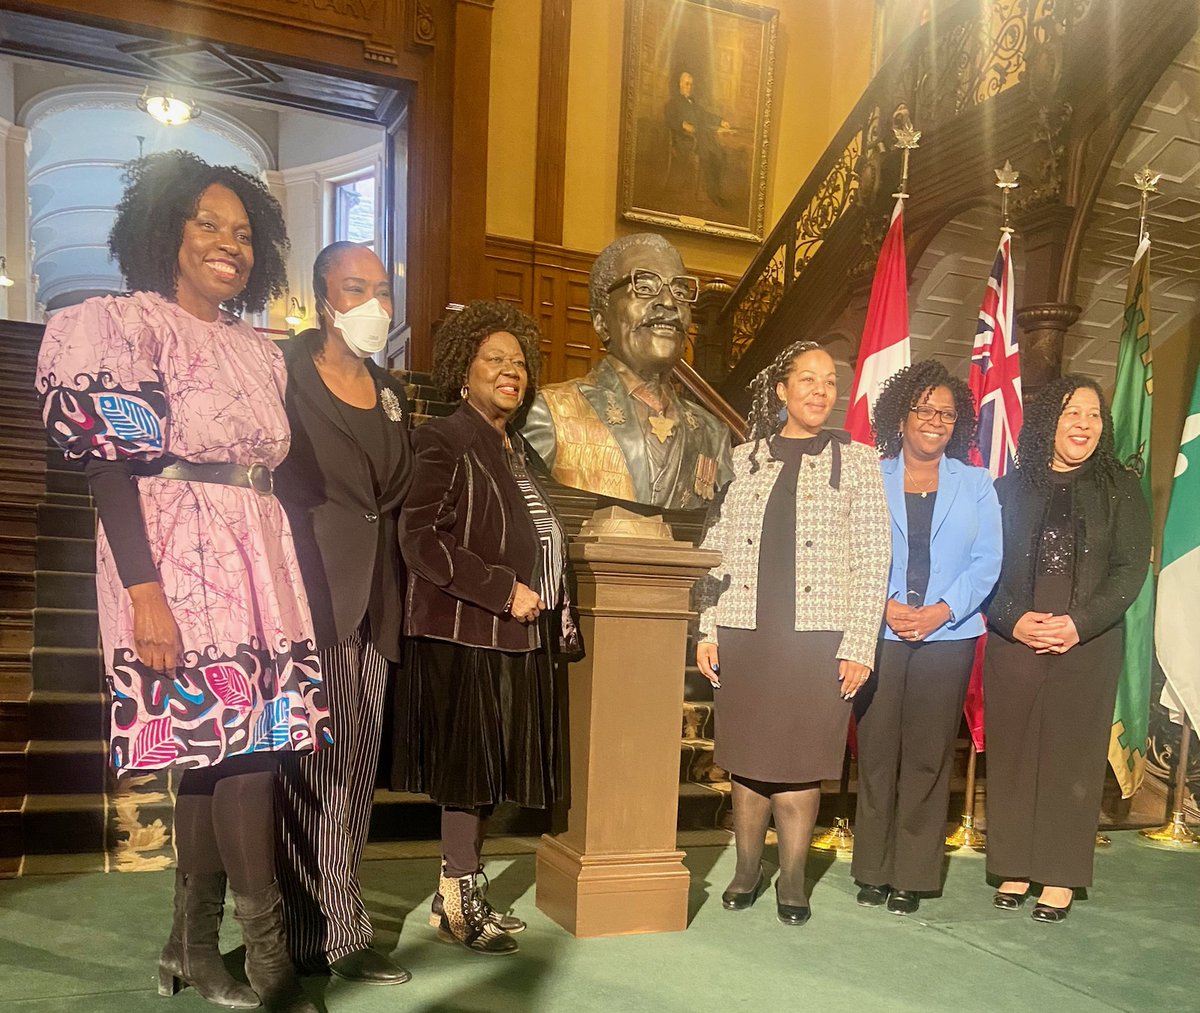 On #LincolnAlexanderDay this beautiful bronze Bust in his likeness was revealed! It will be in the halls of Queen's Park for school children and visitors to see. Thank you to artist Quentin Vercetty, and all involved with the LINC Committee.